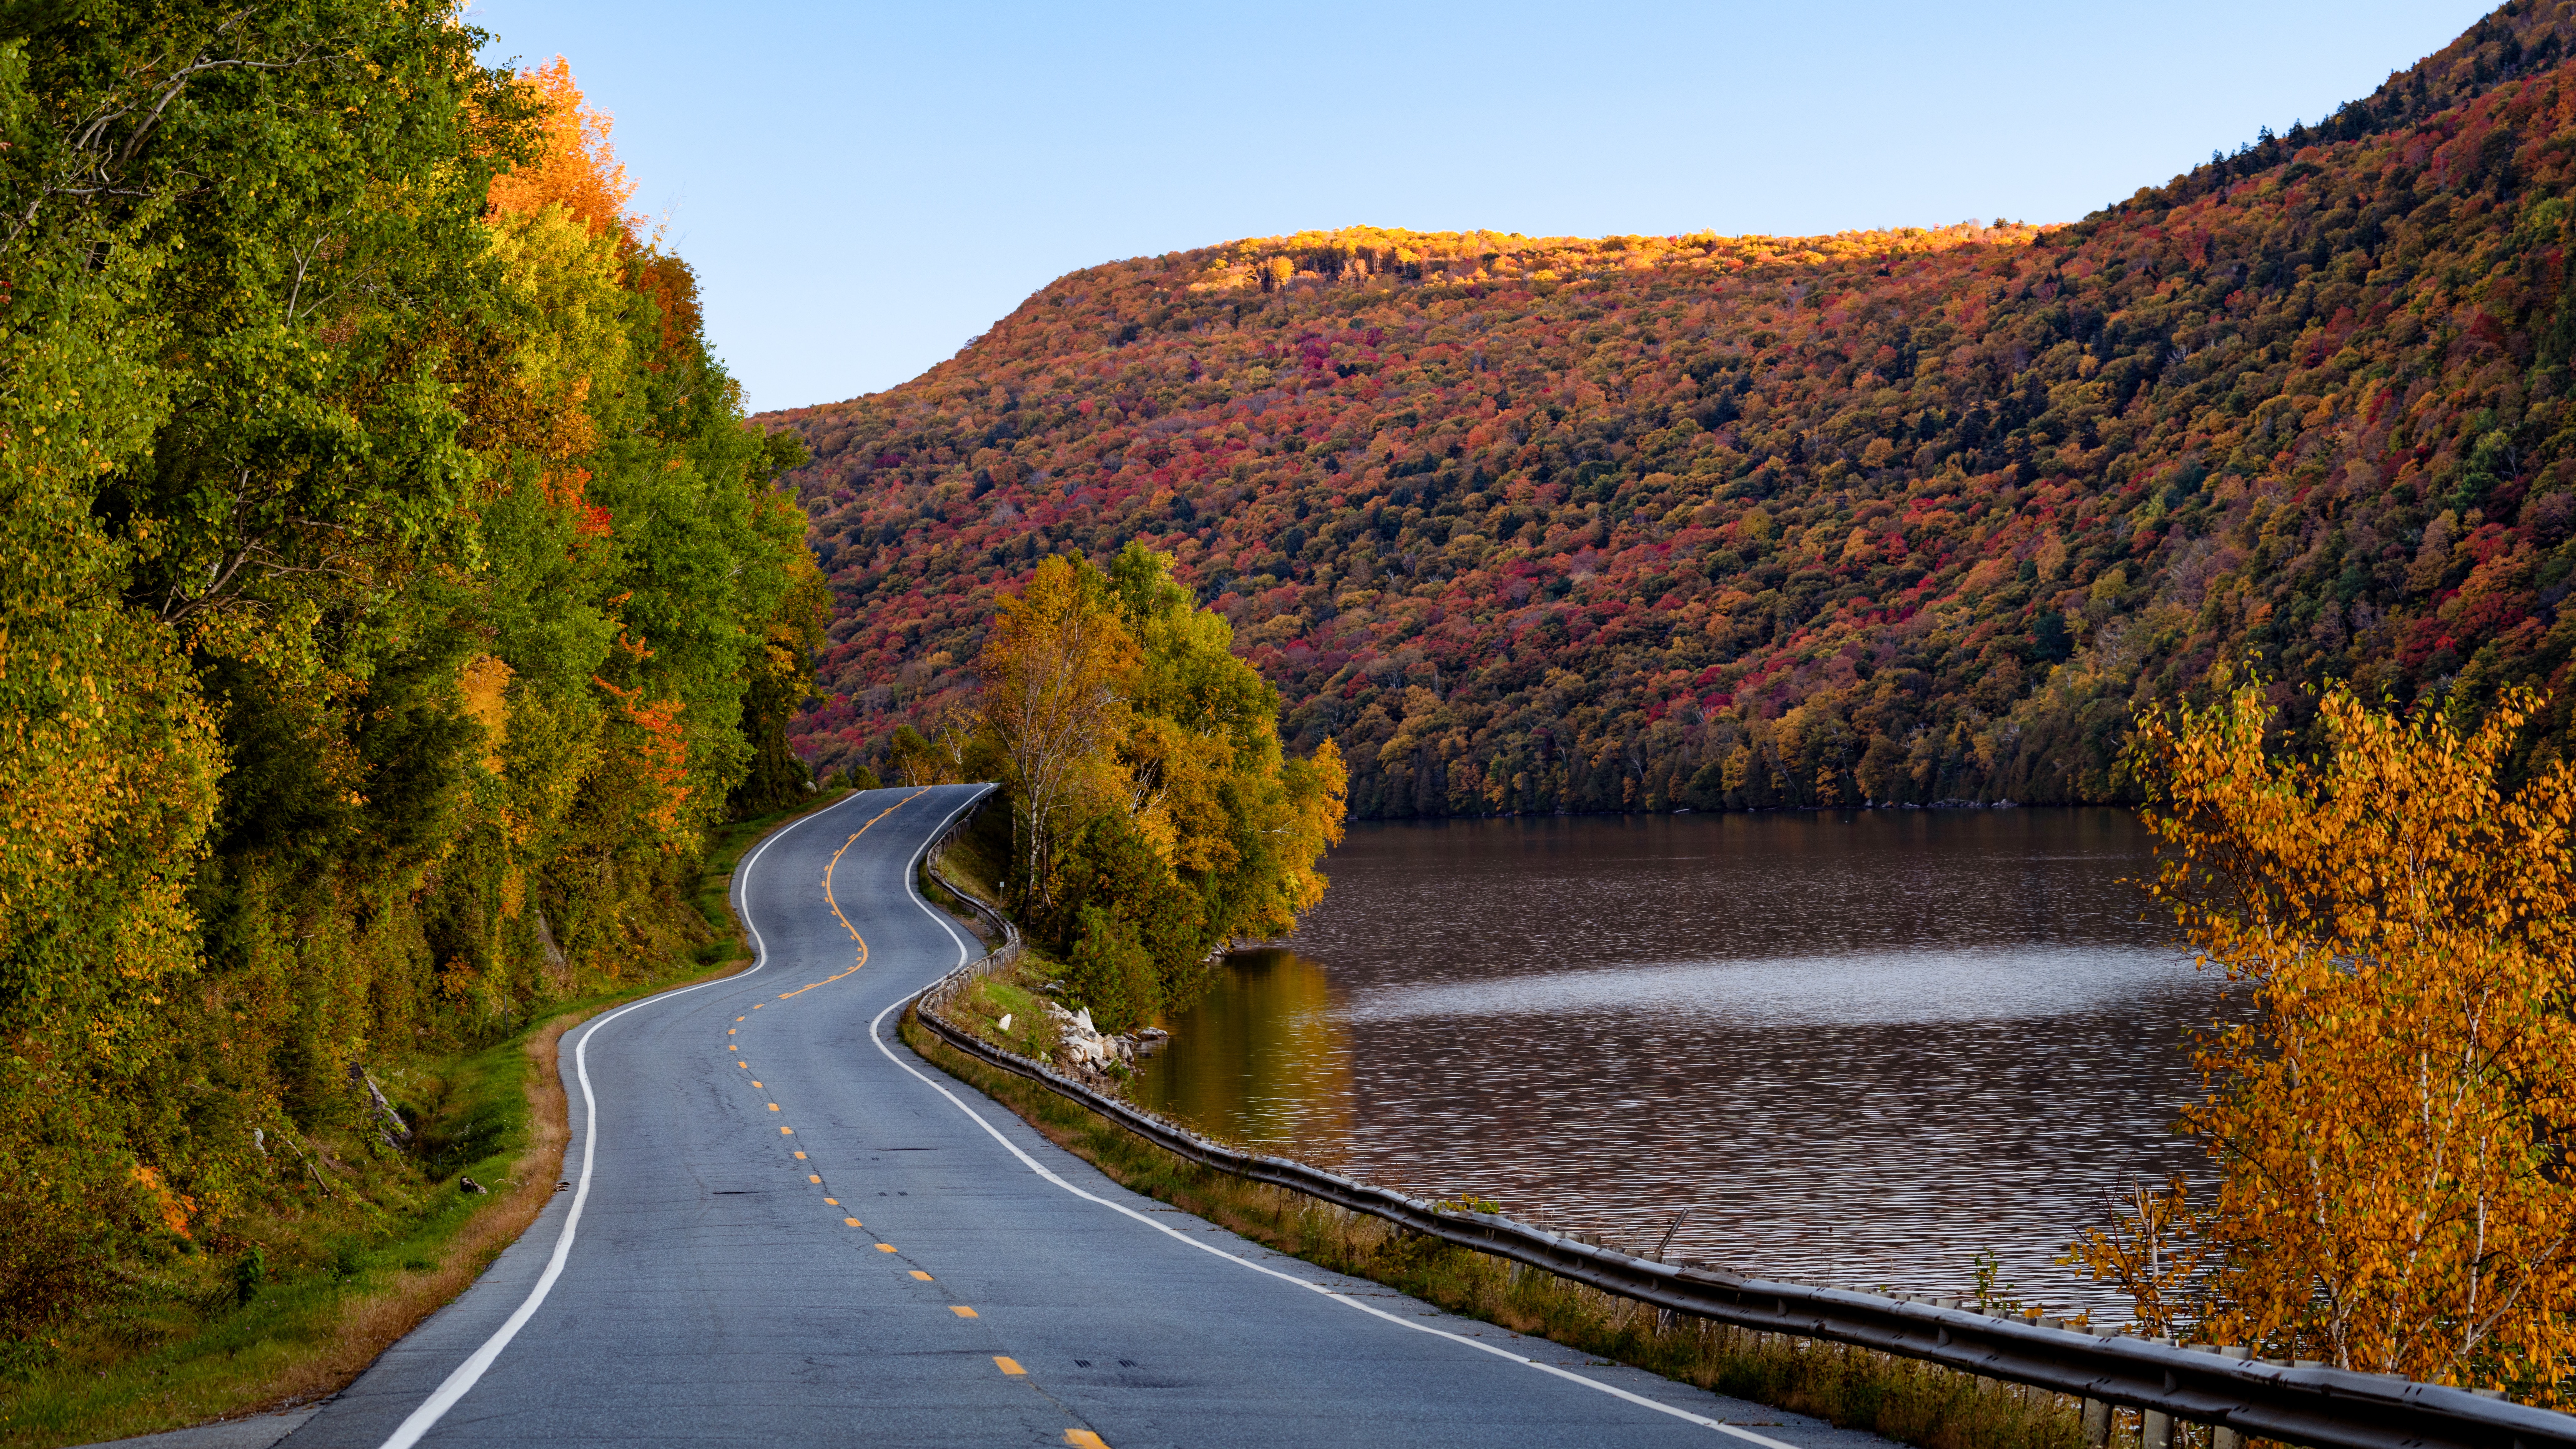 An Ultimate Guide To Taking a New England Fall Road Trip - Travel Noire